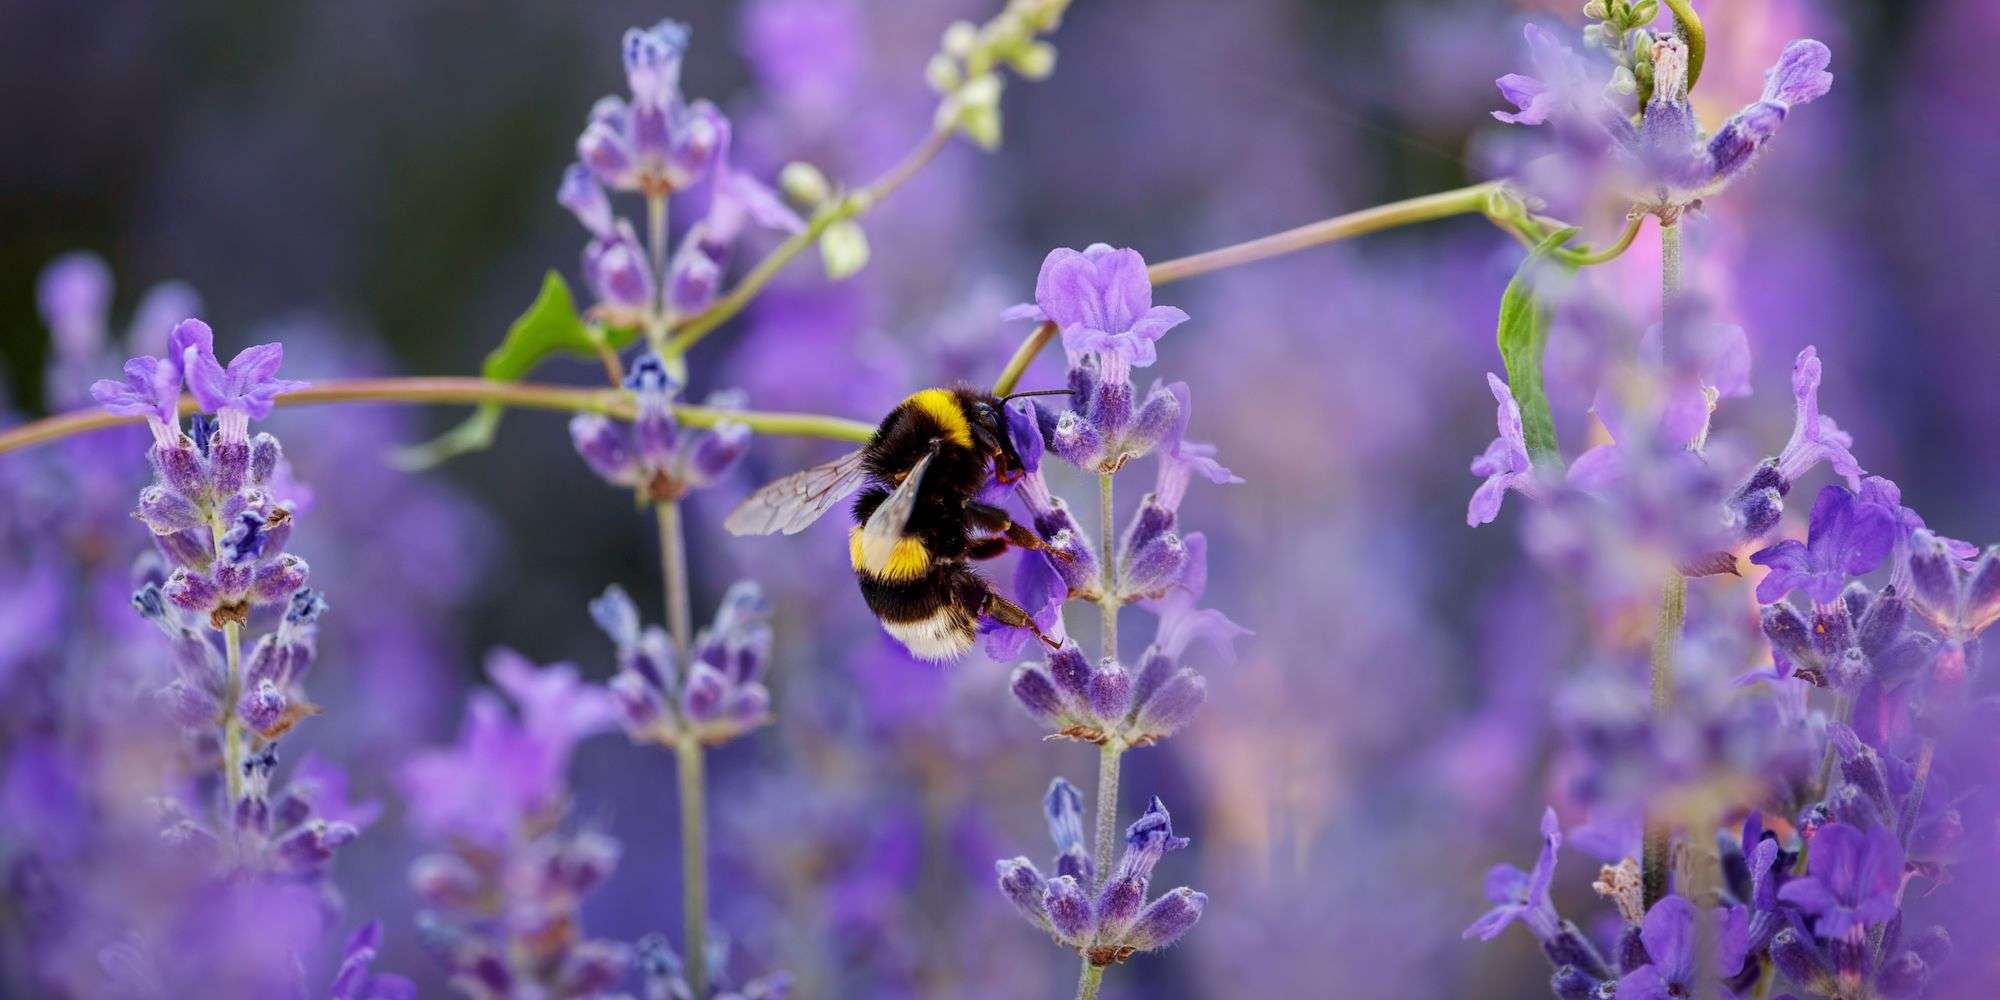 bumble bee getting nectar out of a purple plant